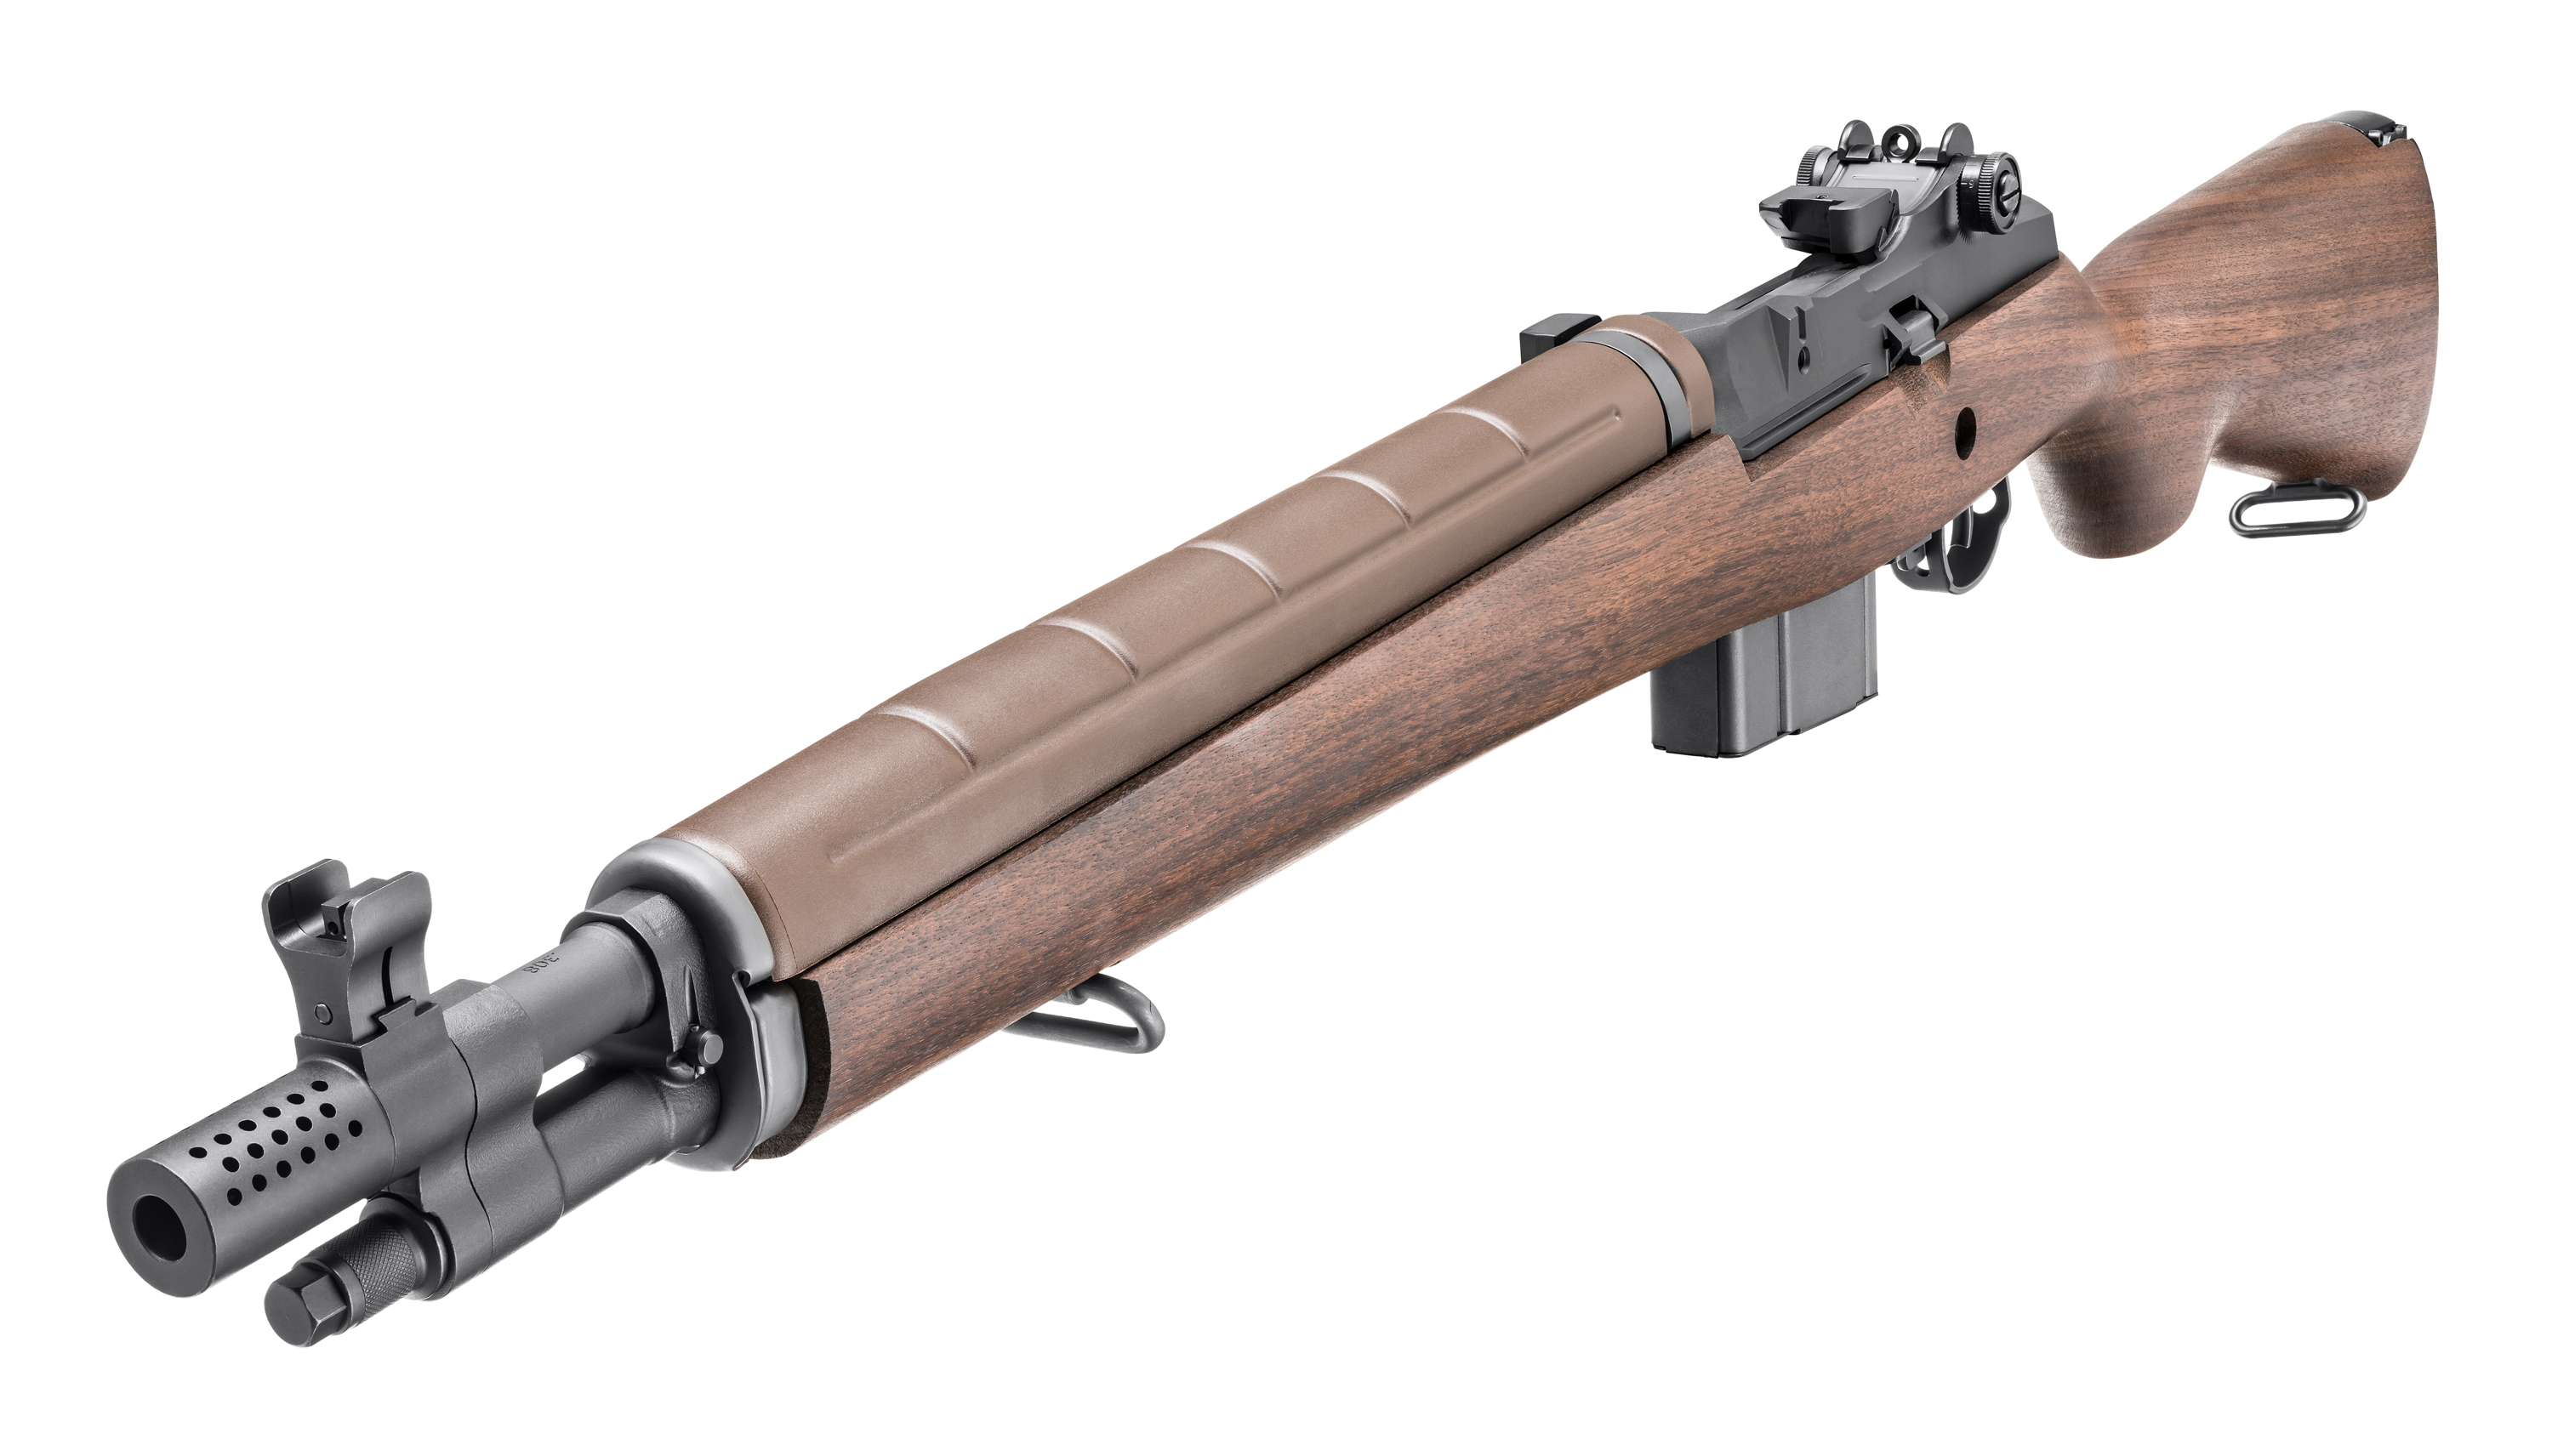 Springfield Armory M1A Tanker